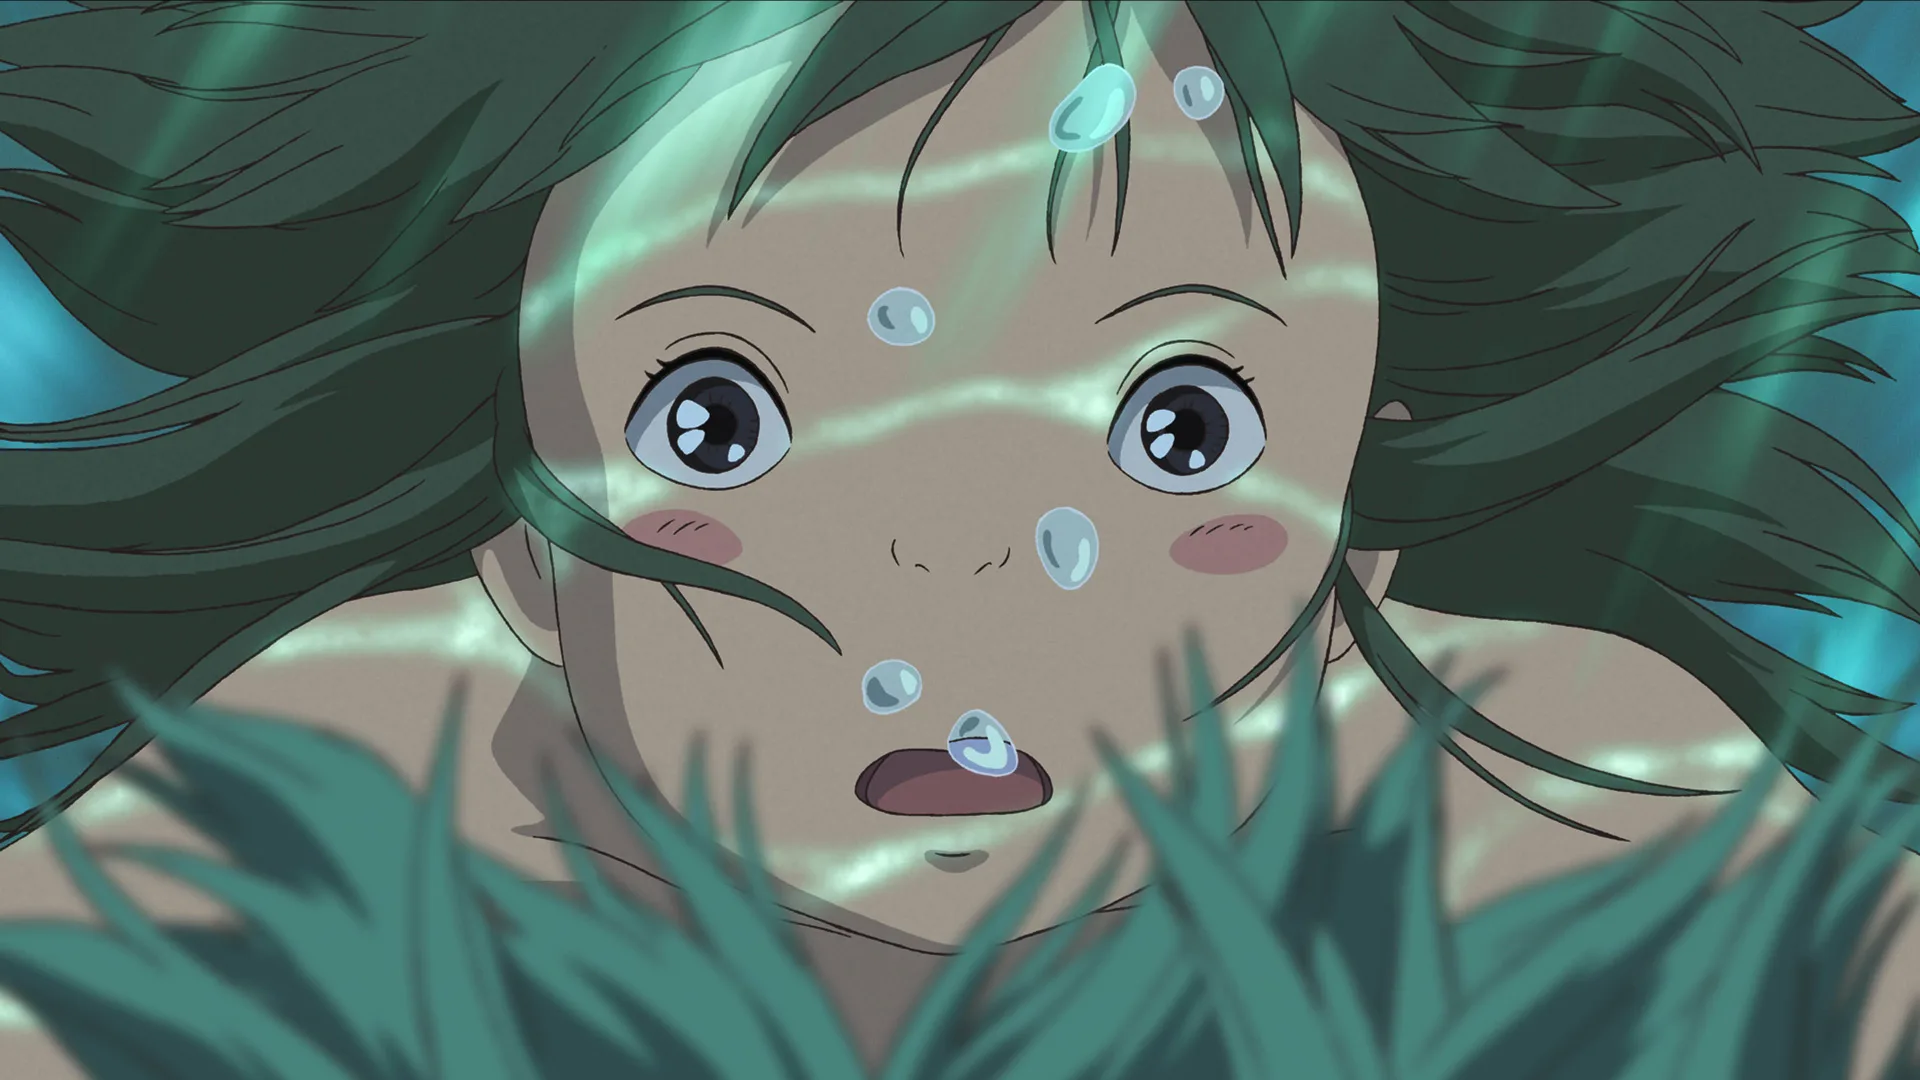 A still from the animated film Spirited Away showing a closeup of Chihiro's face underwater looking surprised